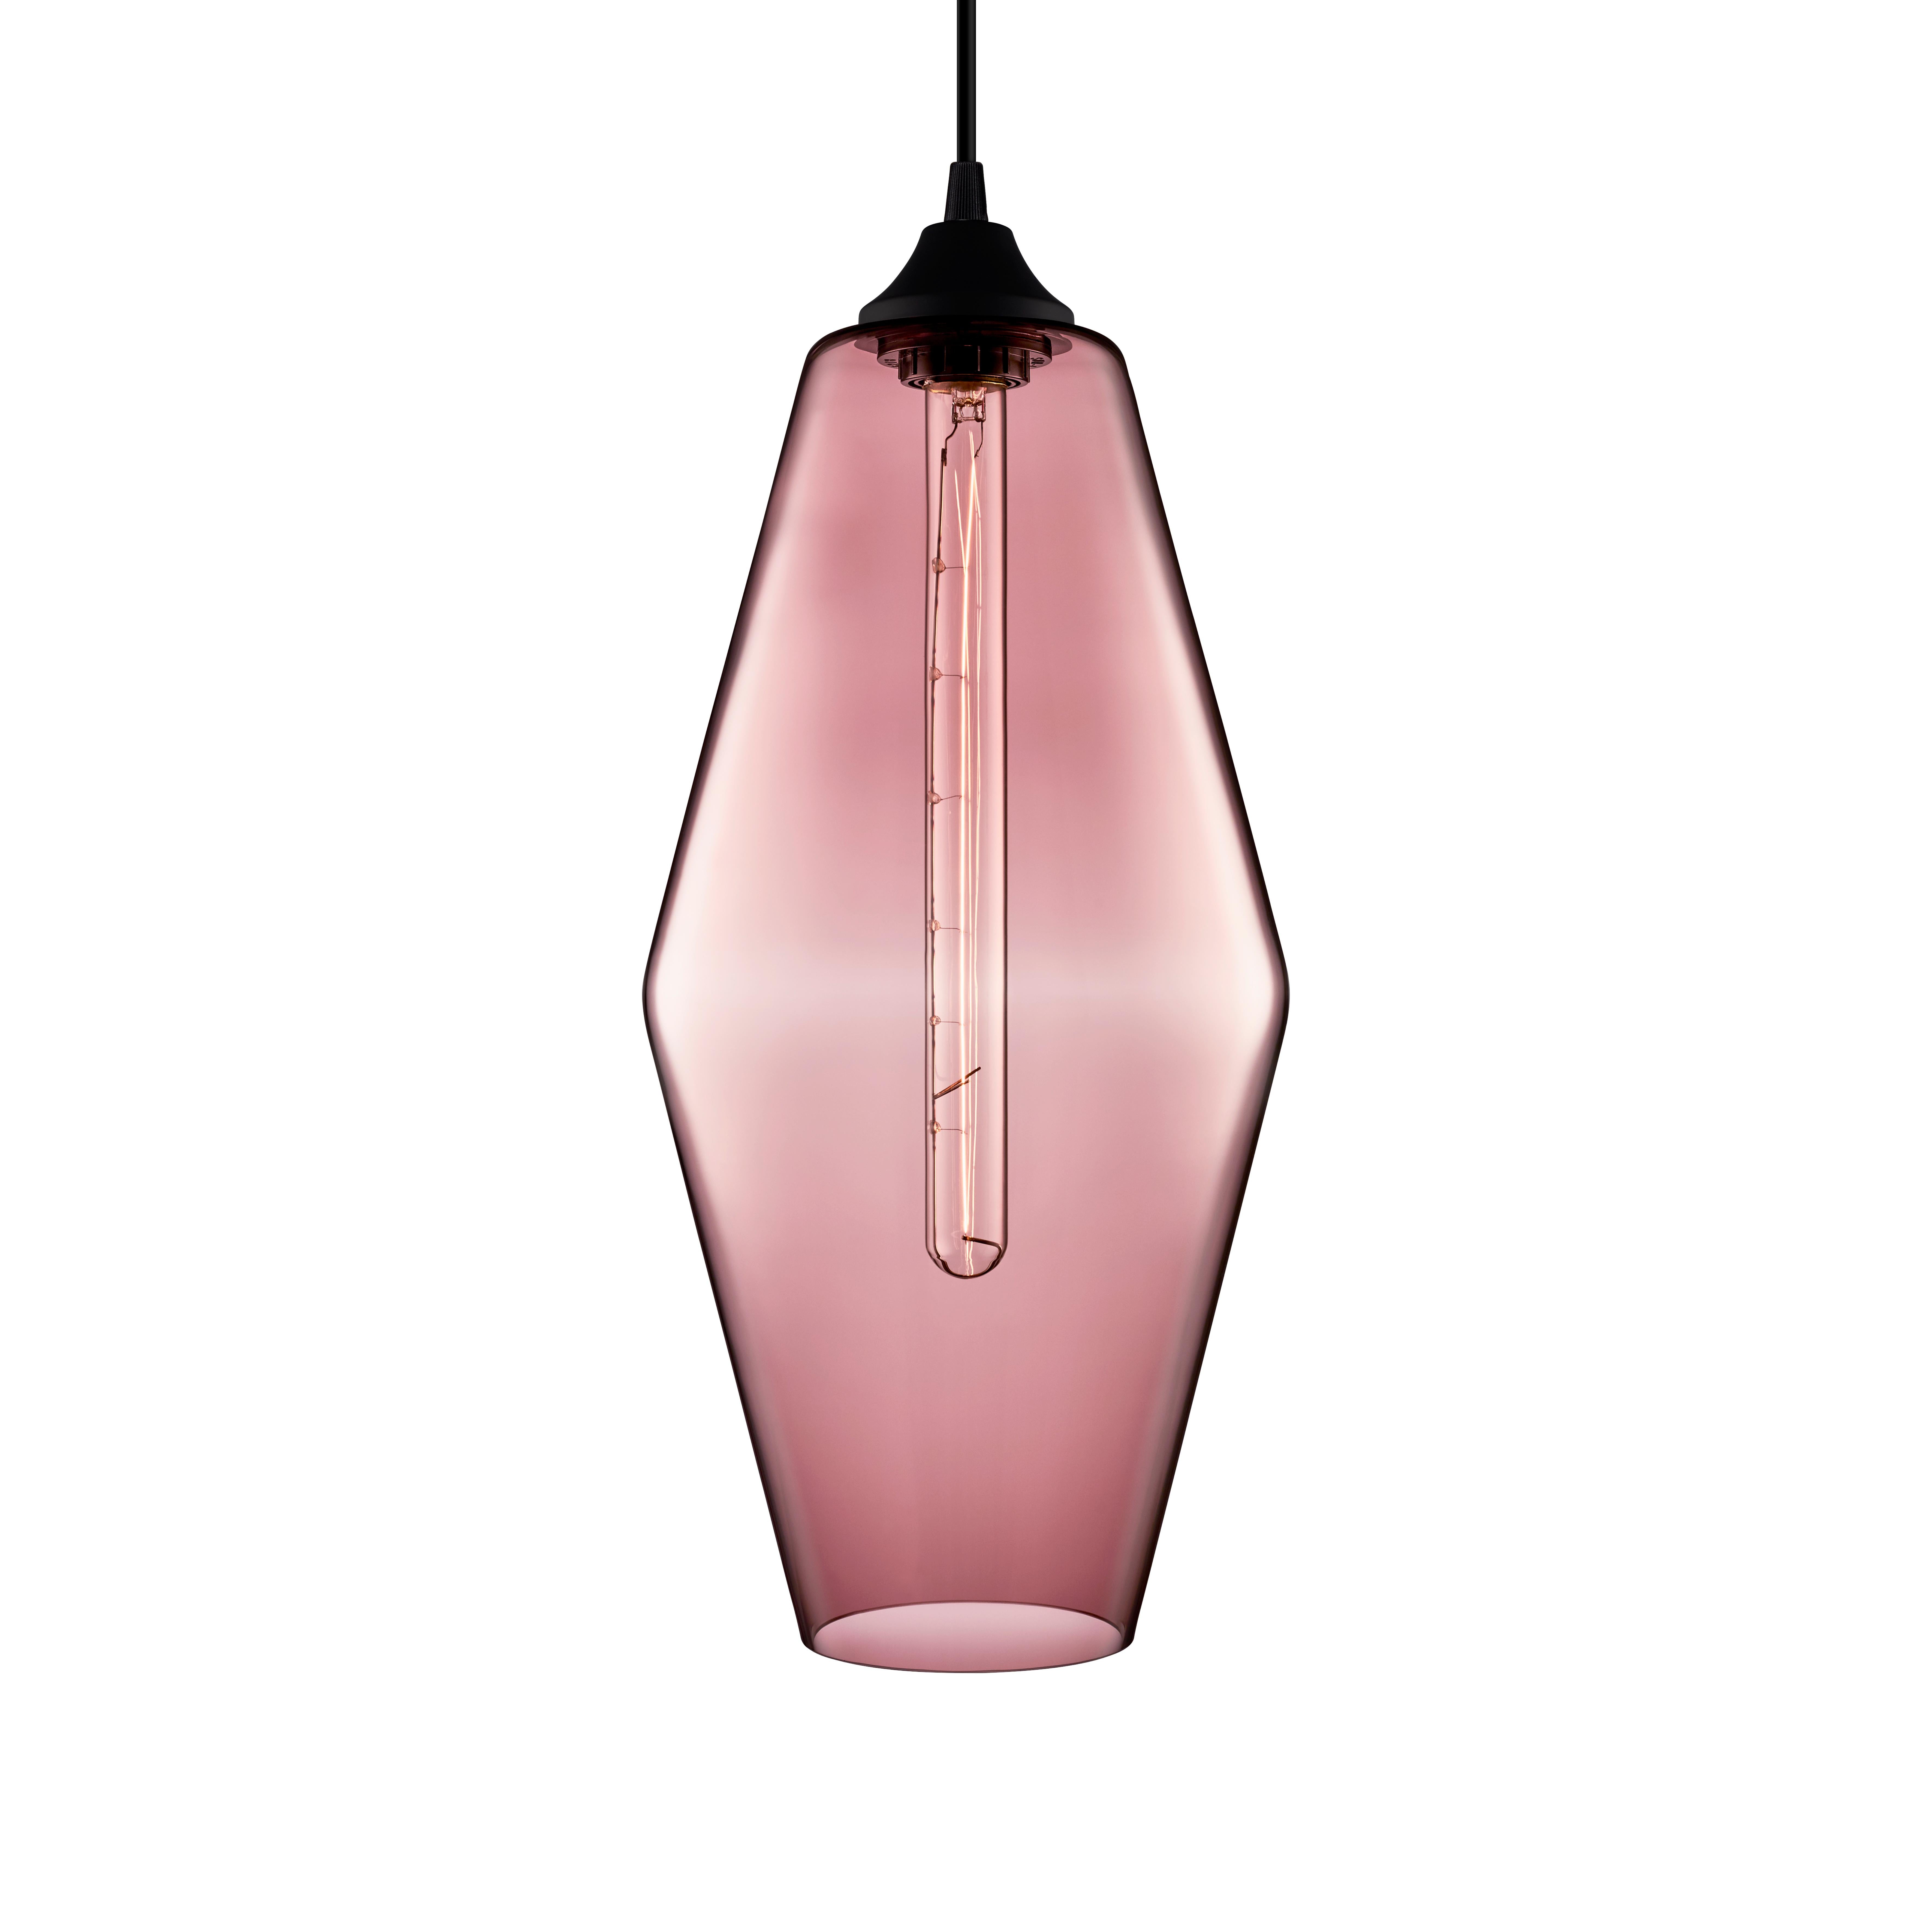 Marquise Grand Gray Optique Handblown Modern Glass Pendant Light, Made in the US For Sale 1